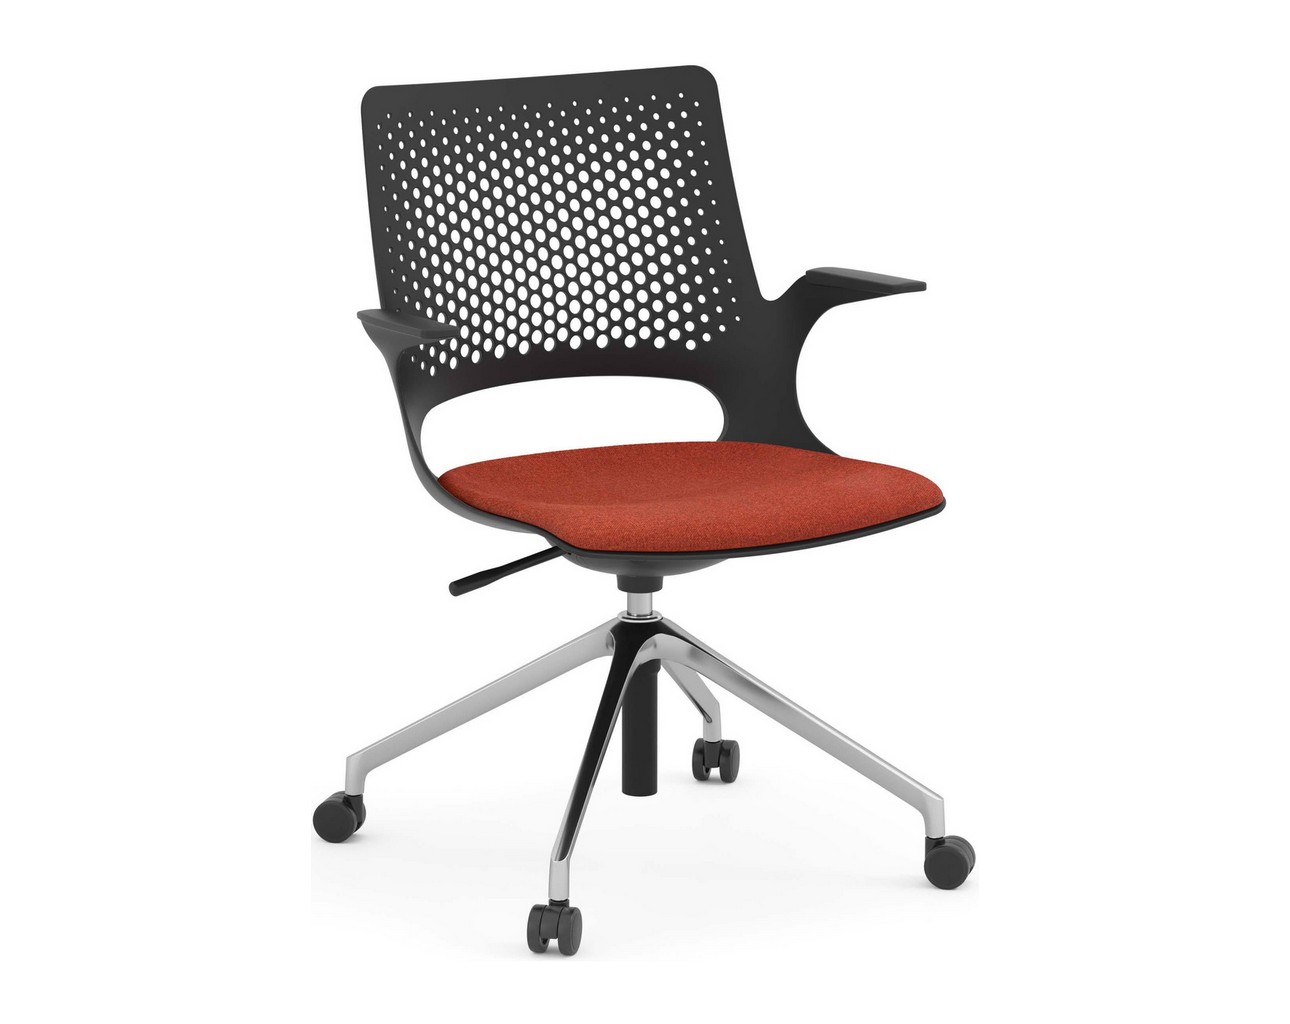 Harmony Multi-Purpose Chair – Polished Aluminum Base and Black Frame with Red Seat